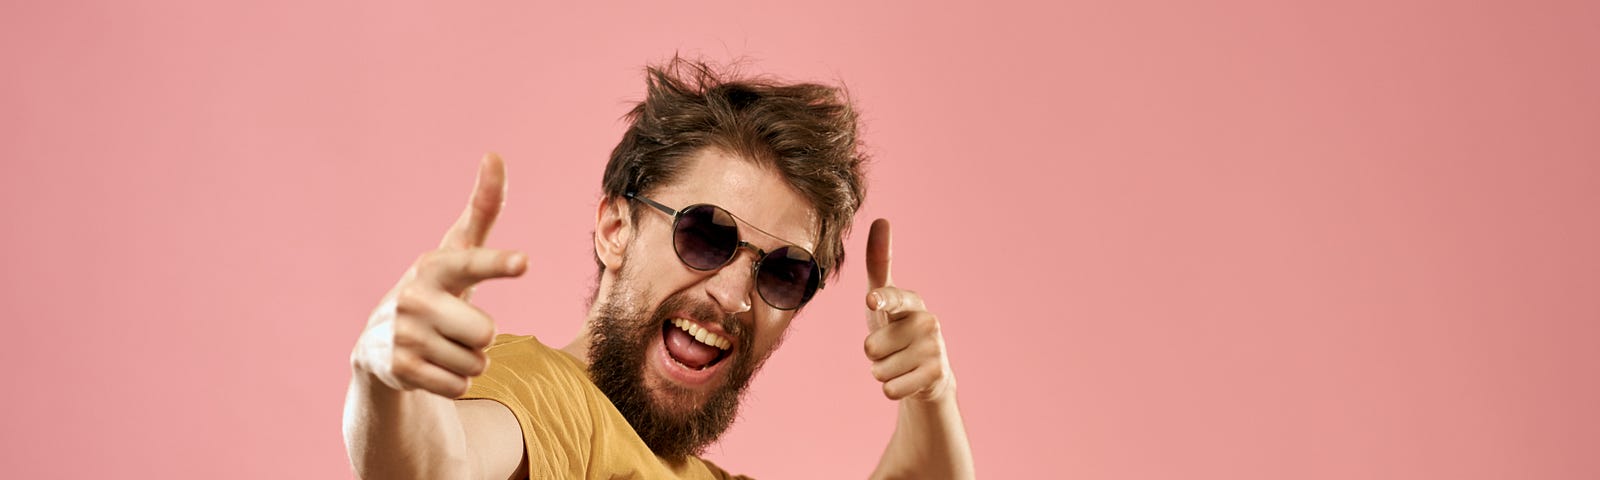 A bearded man wearing sunglasses dancing on pink background